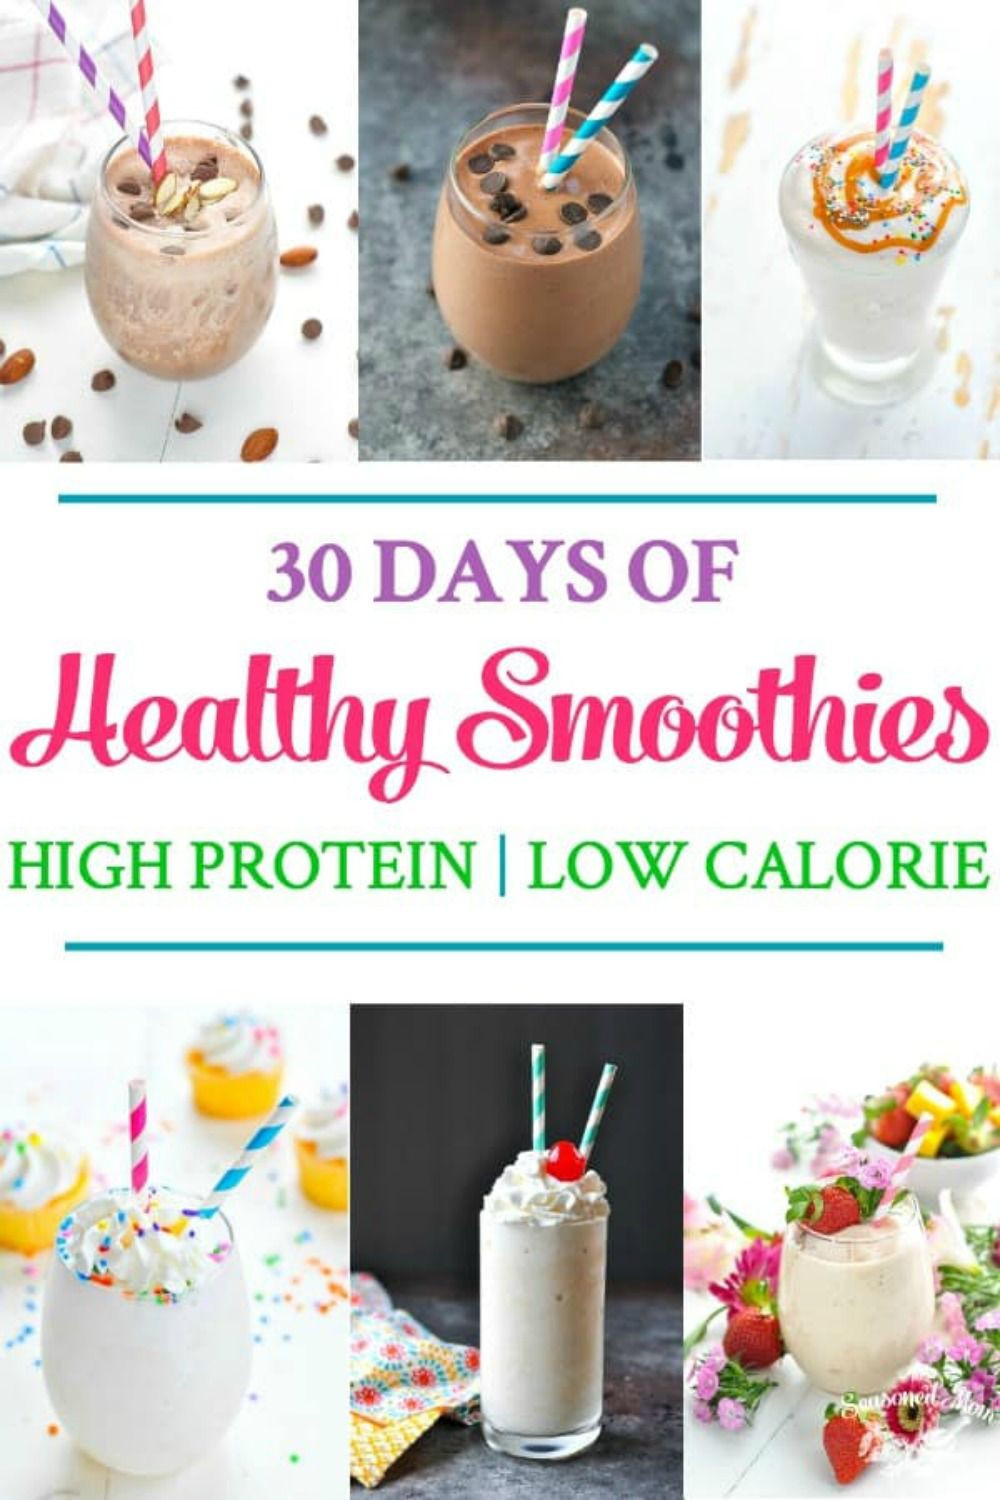 Low Calorie Protein Smoothies
 30 Days of Healthy Smoothie Recipes